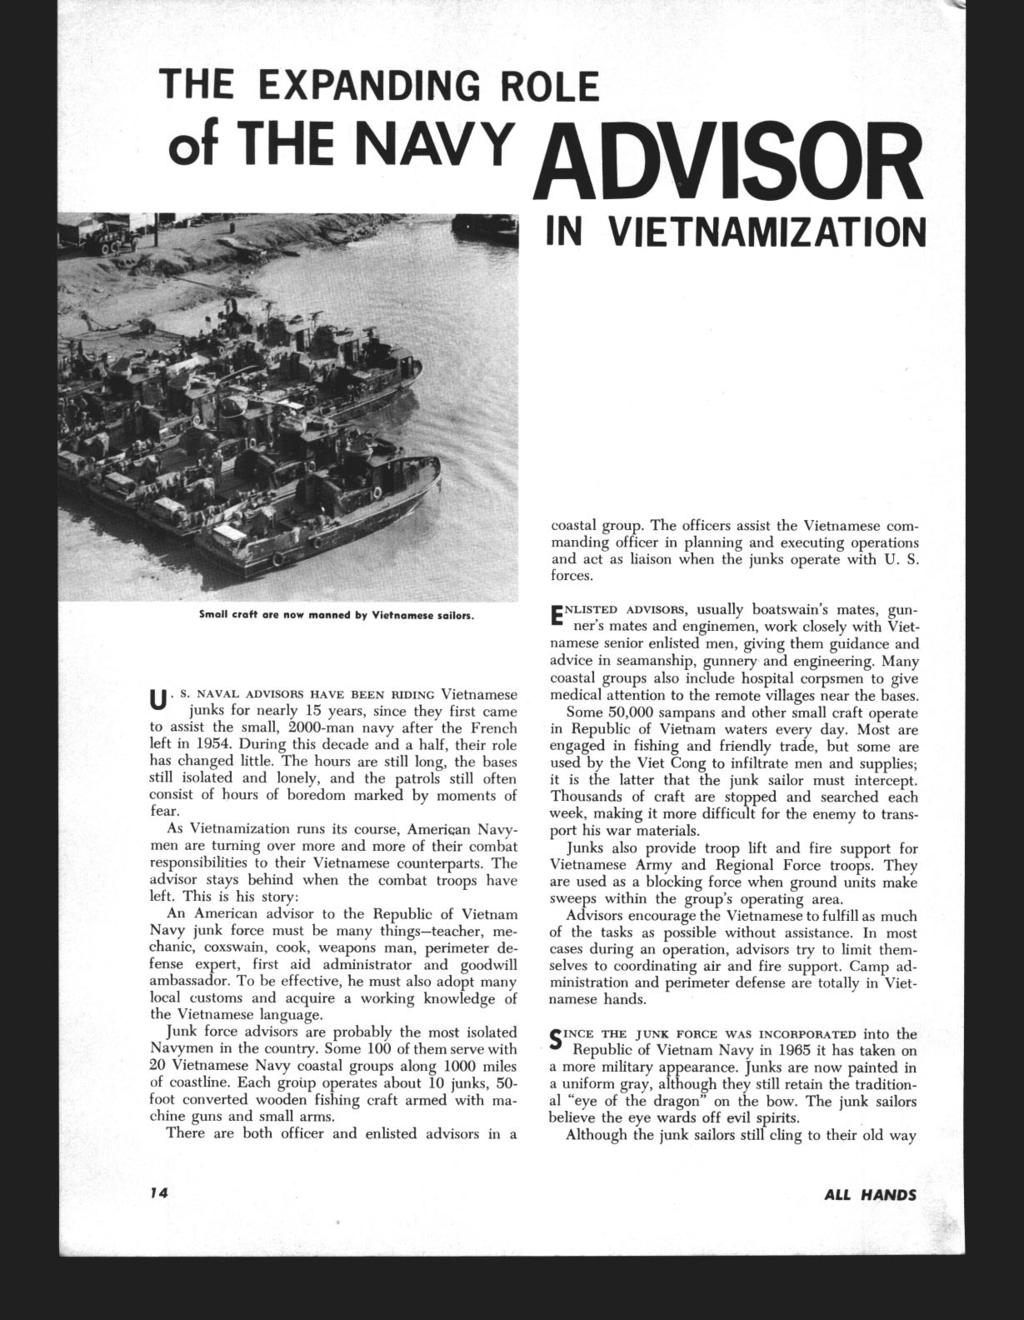 OLE ADVISOR IN VIETNAMIZATION coastal group. The officers assist the Vietnamese commanding officer in planning and executing operations and act as liaison when the junks operate with U. S. forces.